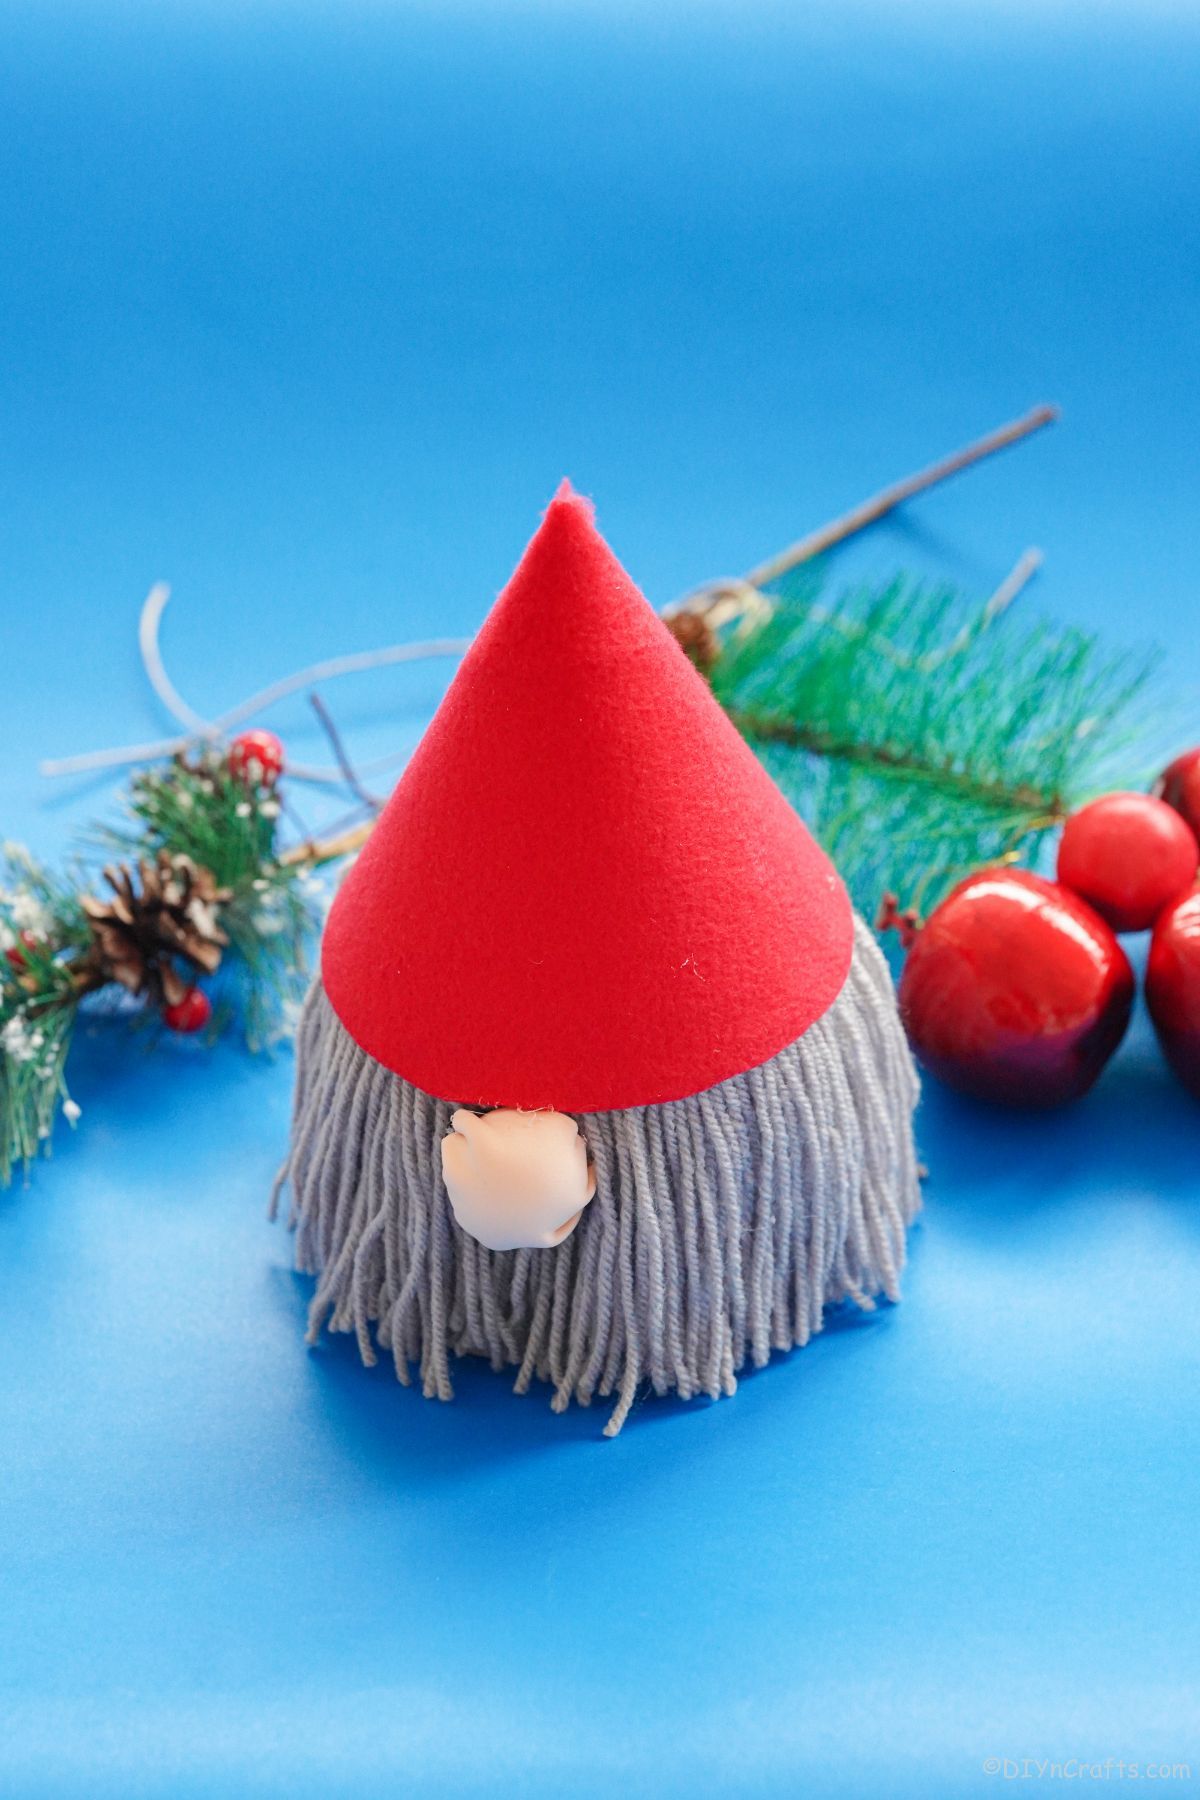 Gnome mini Valentine gnome ornament  gift hanger wine bottle hanger  made with felted wool from sweaters